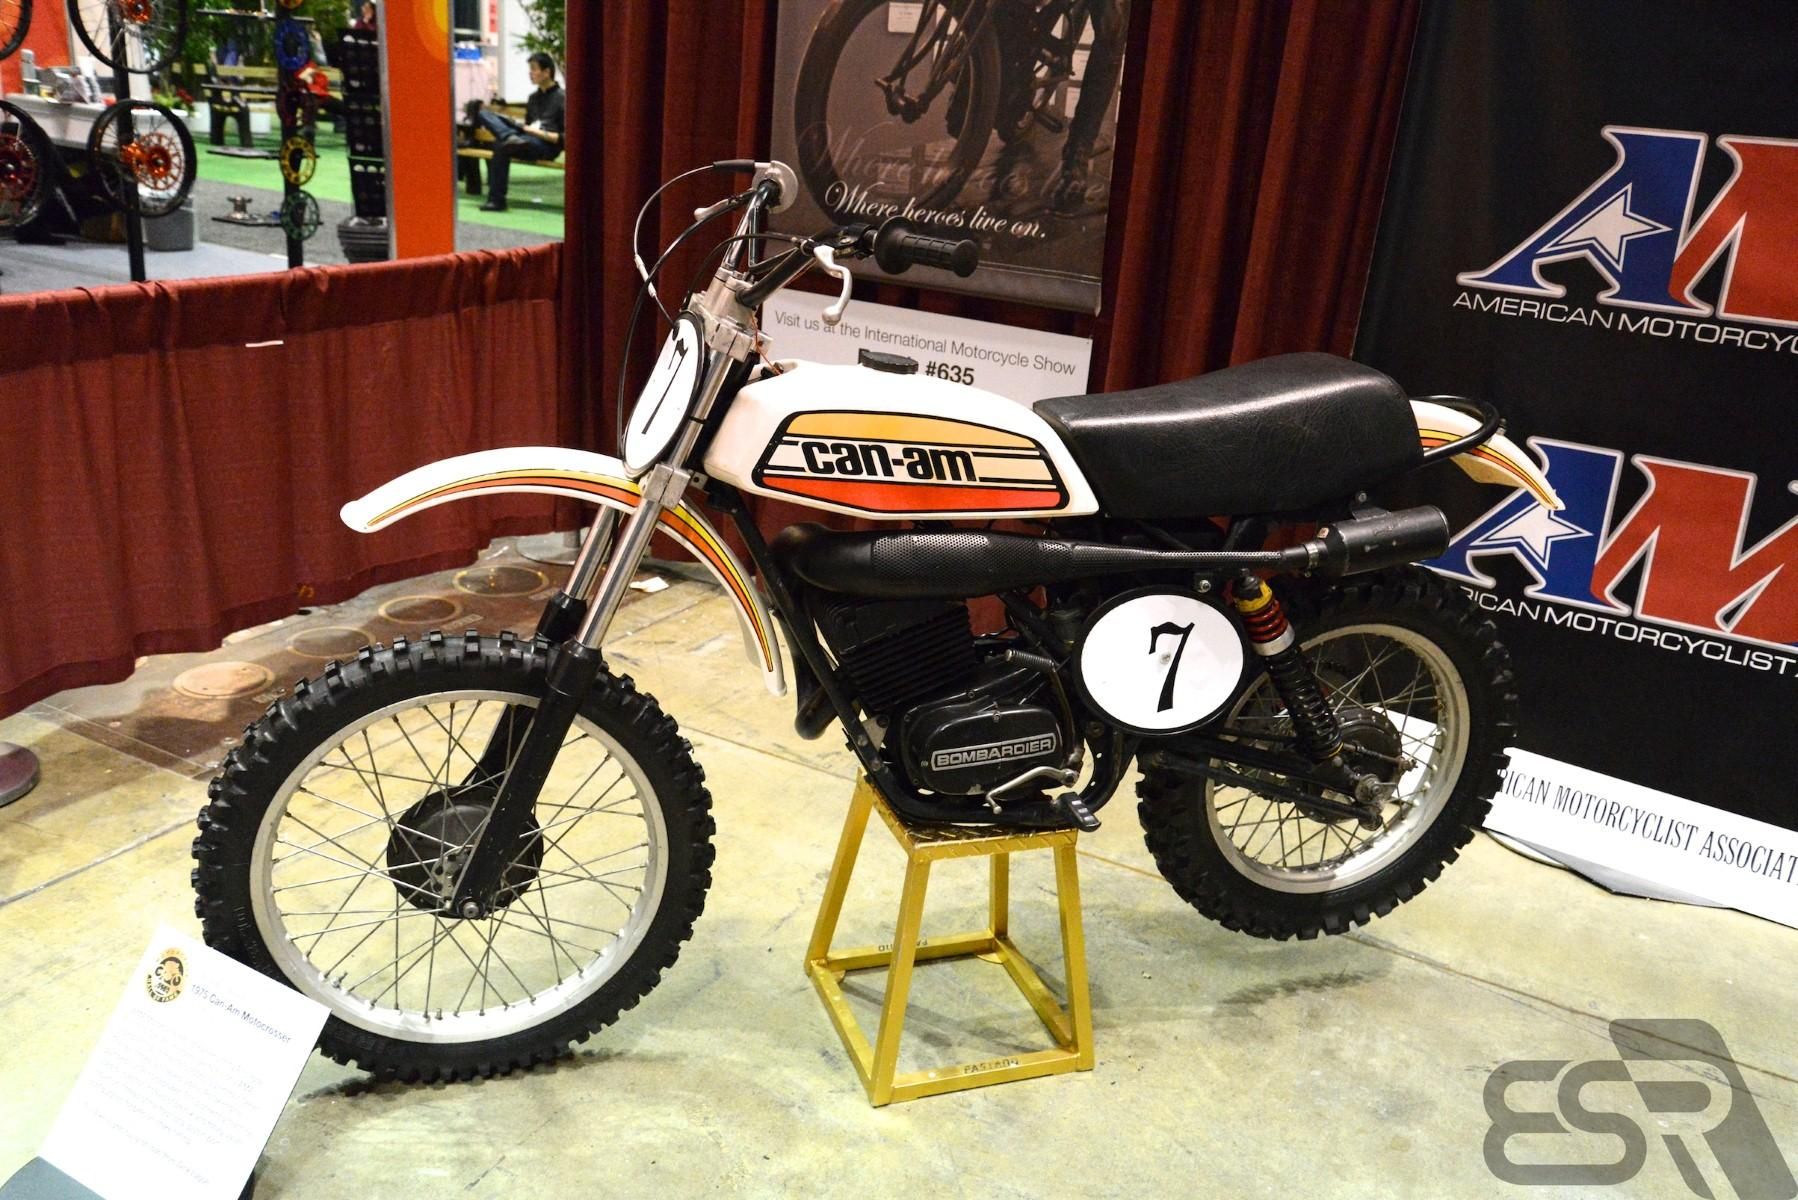 1975 Can-Am Motocrosser - left side view